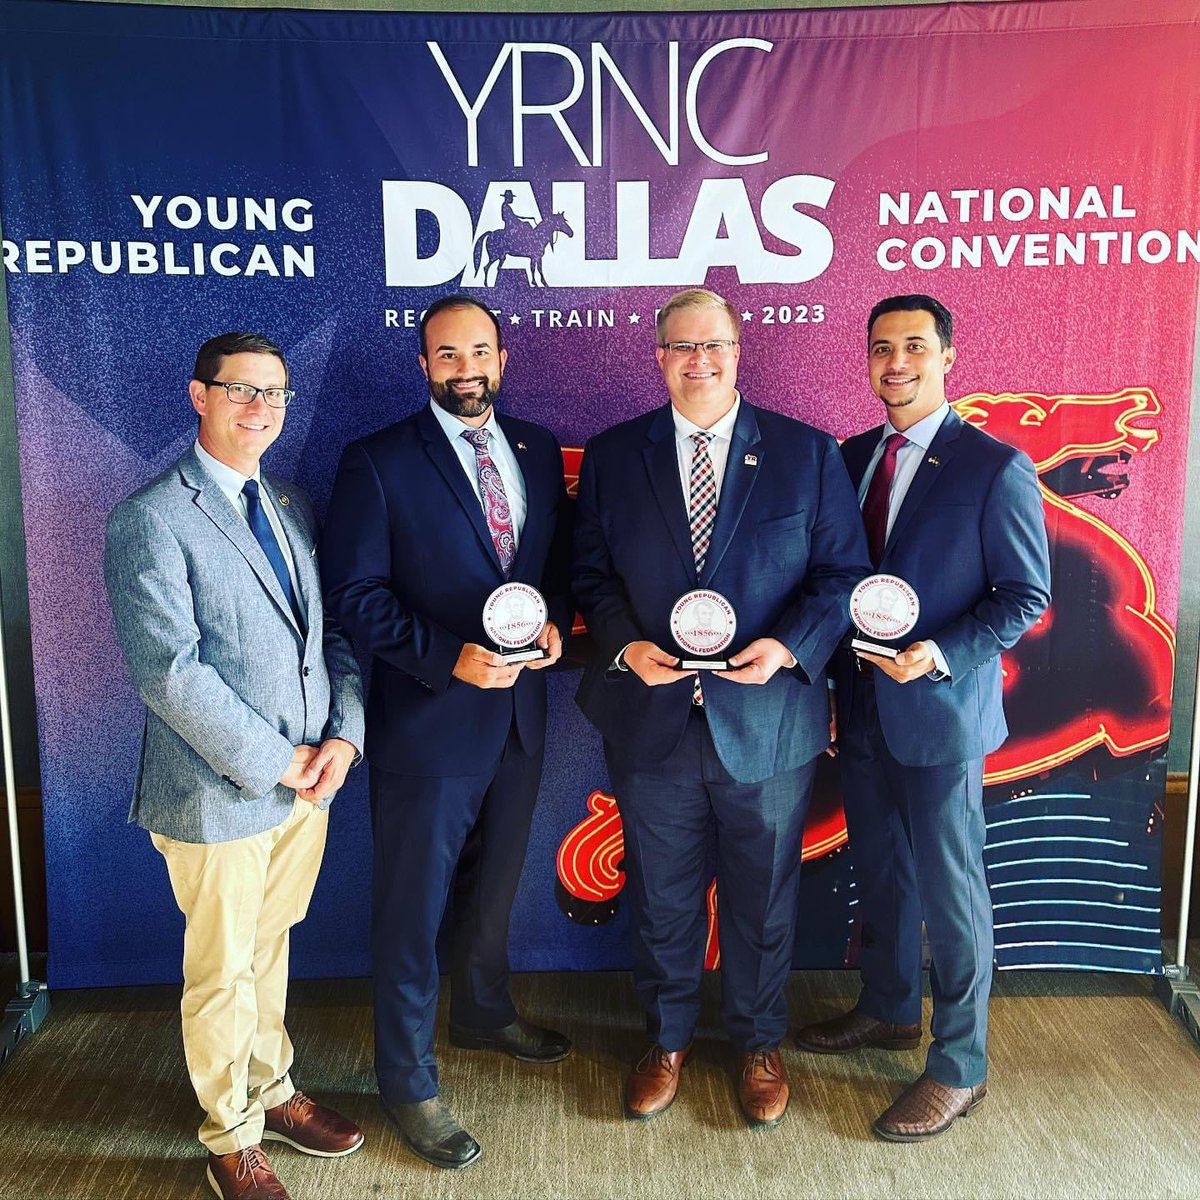 Grateful to join my colleagues this evening in Dallas and grateful to @yrnf for the honor of becoming an 1856 Society member. I’m eager to carry the torch for Young Republicans at home in Pennsylvania.